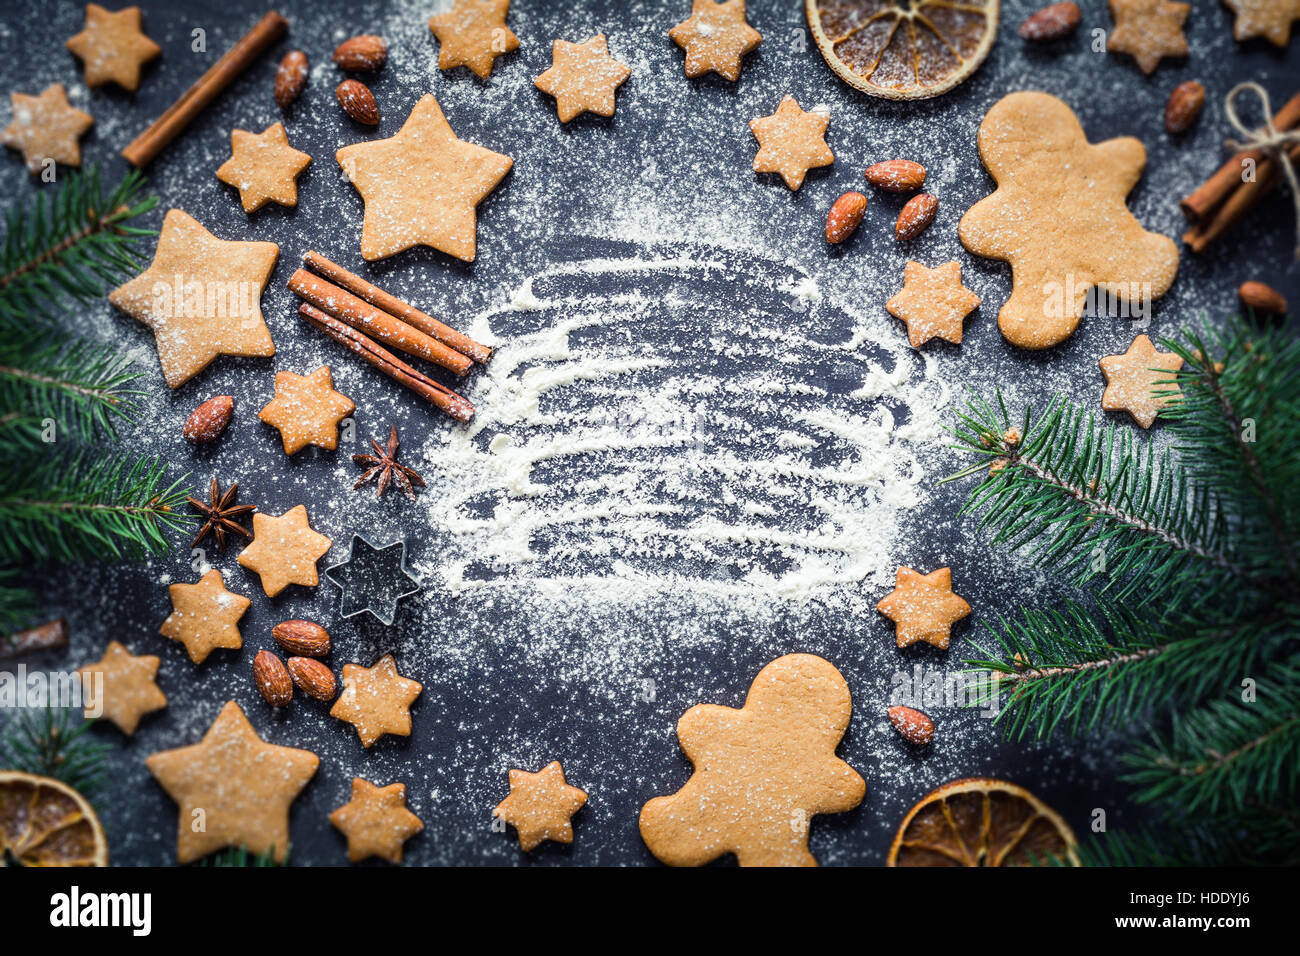 Christmas frame with gingerbread man cookies, gingerbread stars, cinnamon, spices, almonds and fir tree. Copy space for text. Stock Photo